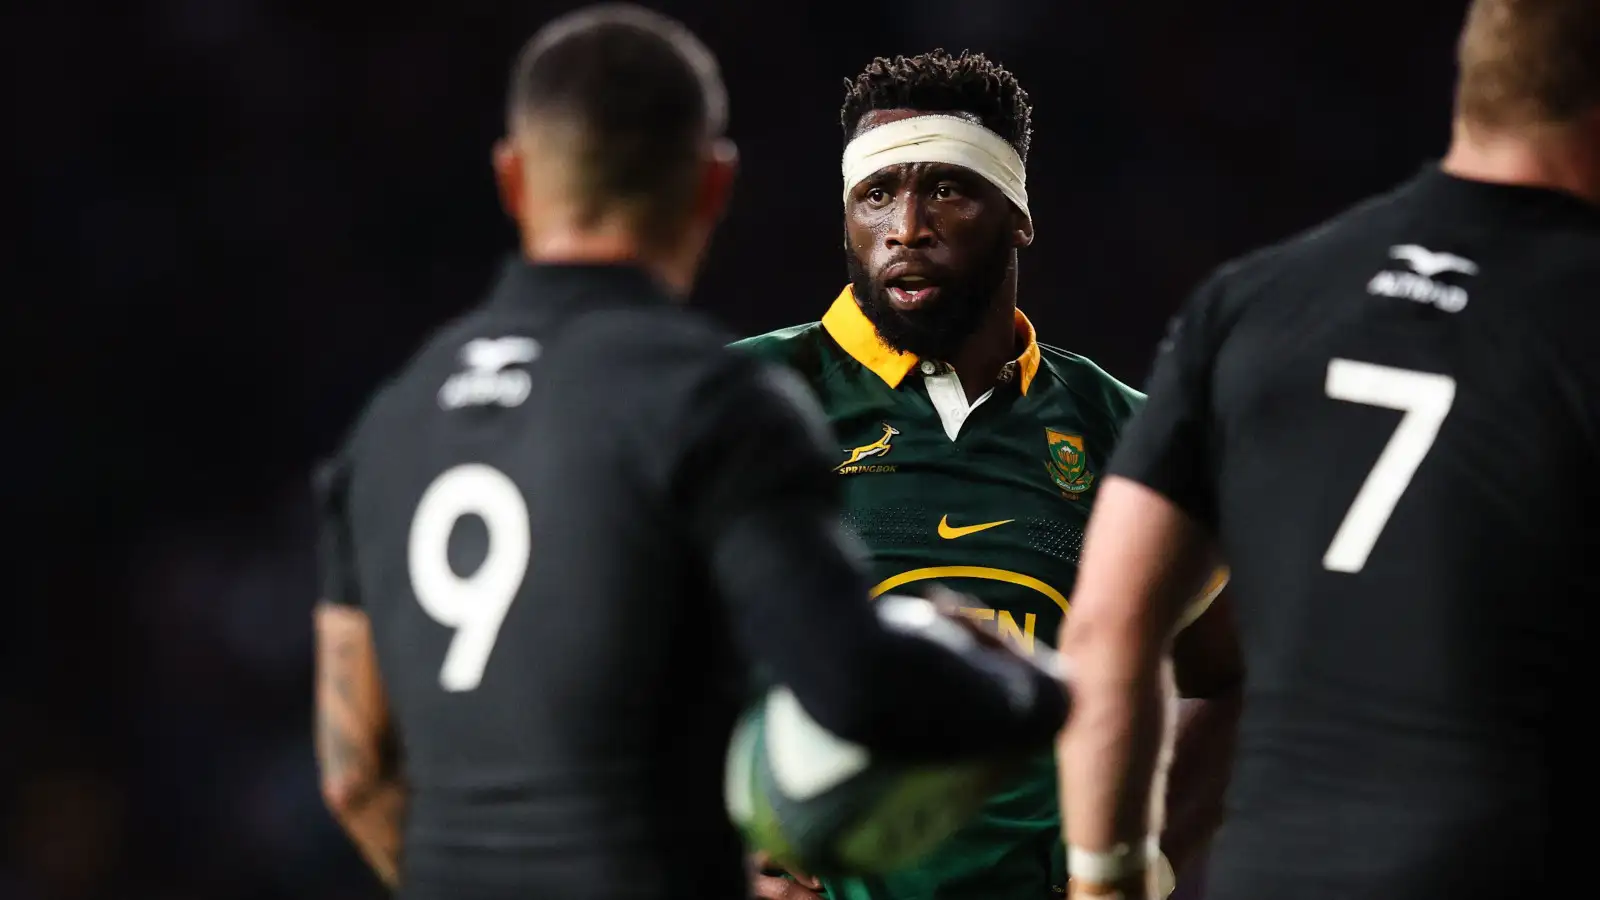 Springboks could be forced to don blue jersey for World Cup